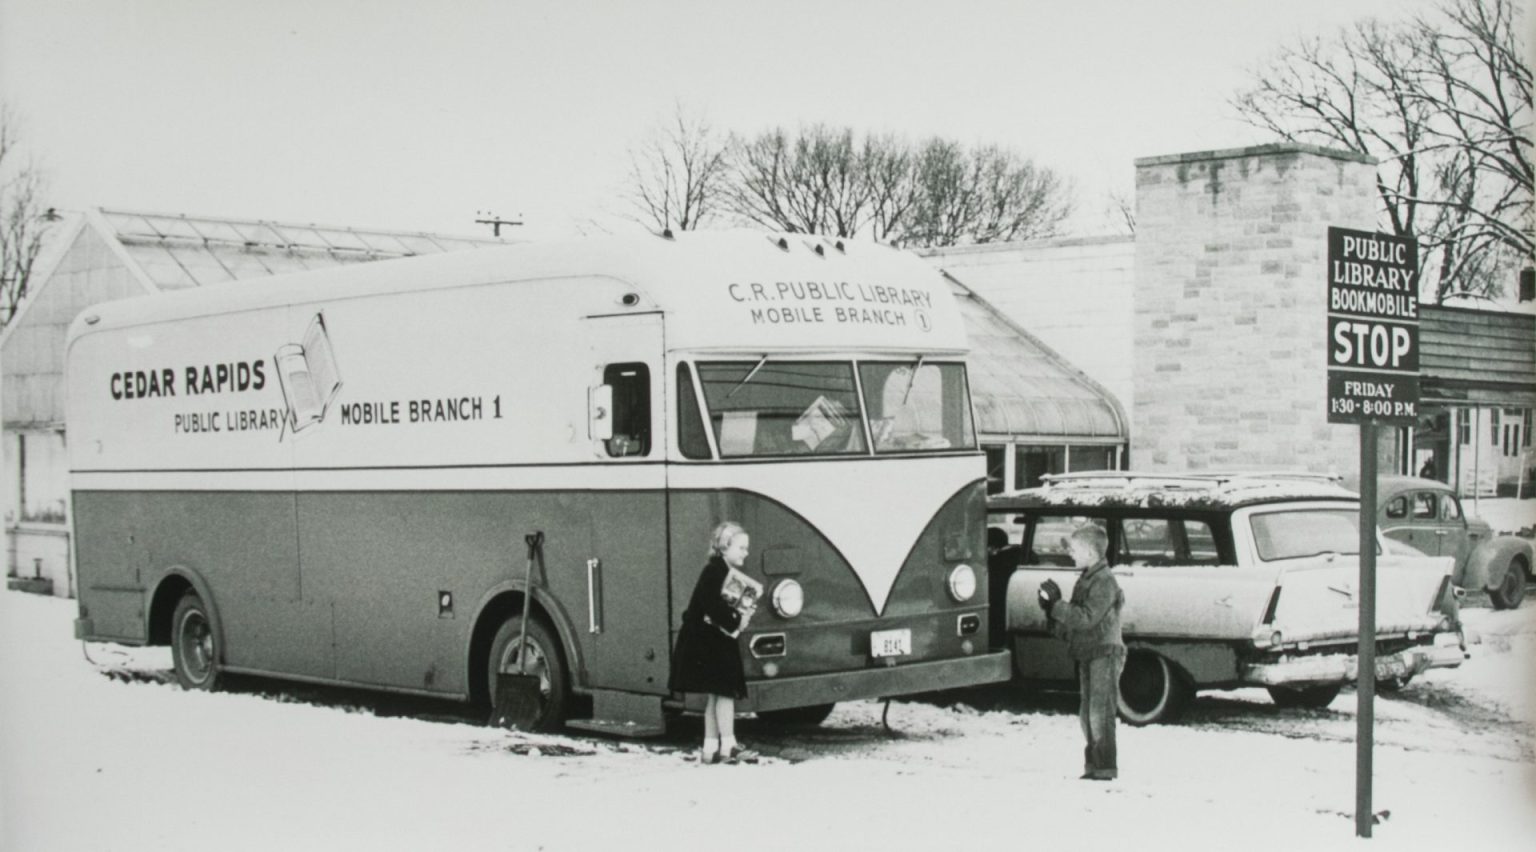 Children stand in the snow in front of a book mobile in this black and white photo.